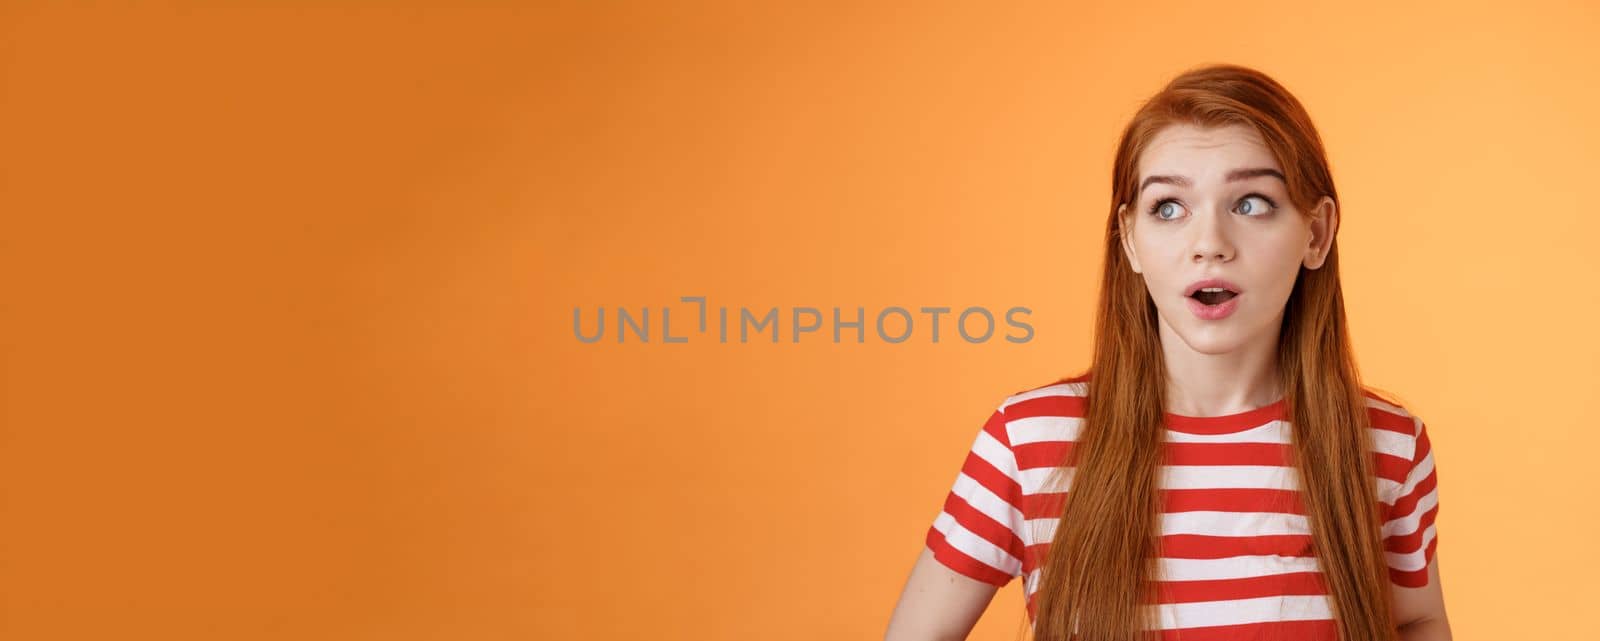 Close-up enthusiastic surprised, intrigued redhead caucasian woman look impressed left copy space, open mouth charmed amused, stare speechless, stunning cool promo, stand orange background.